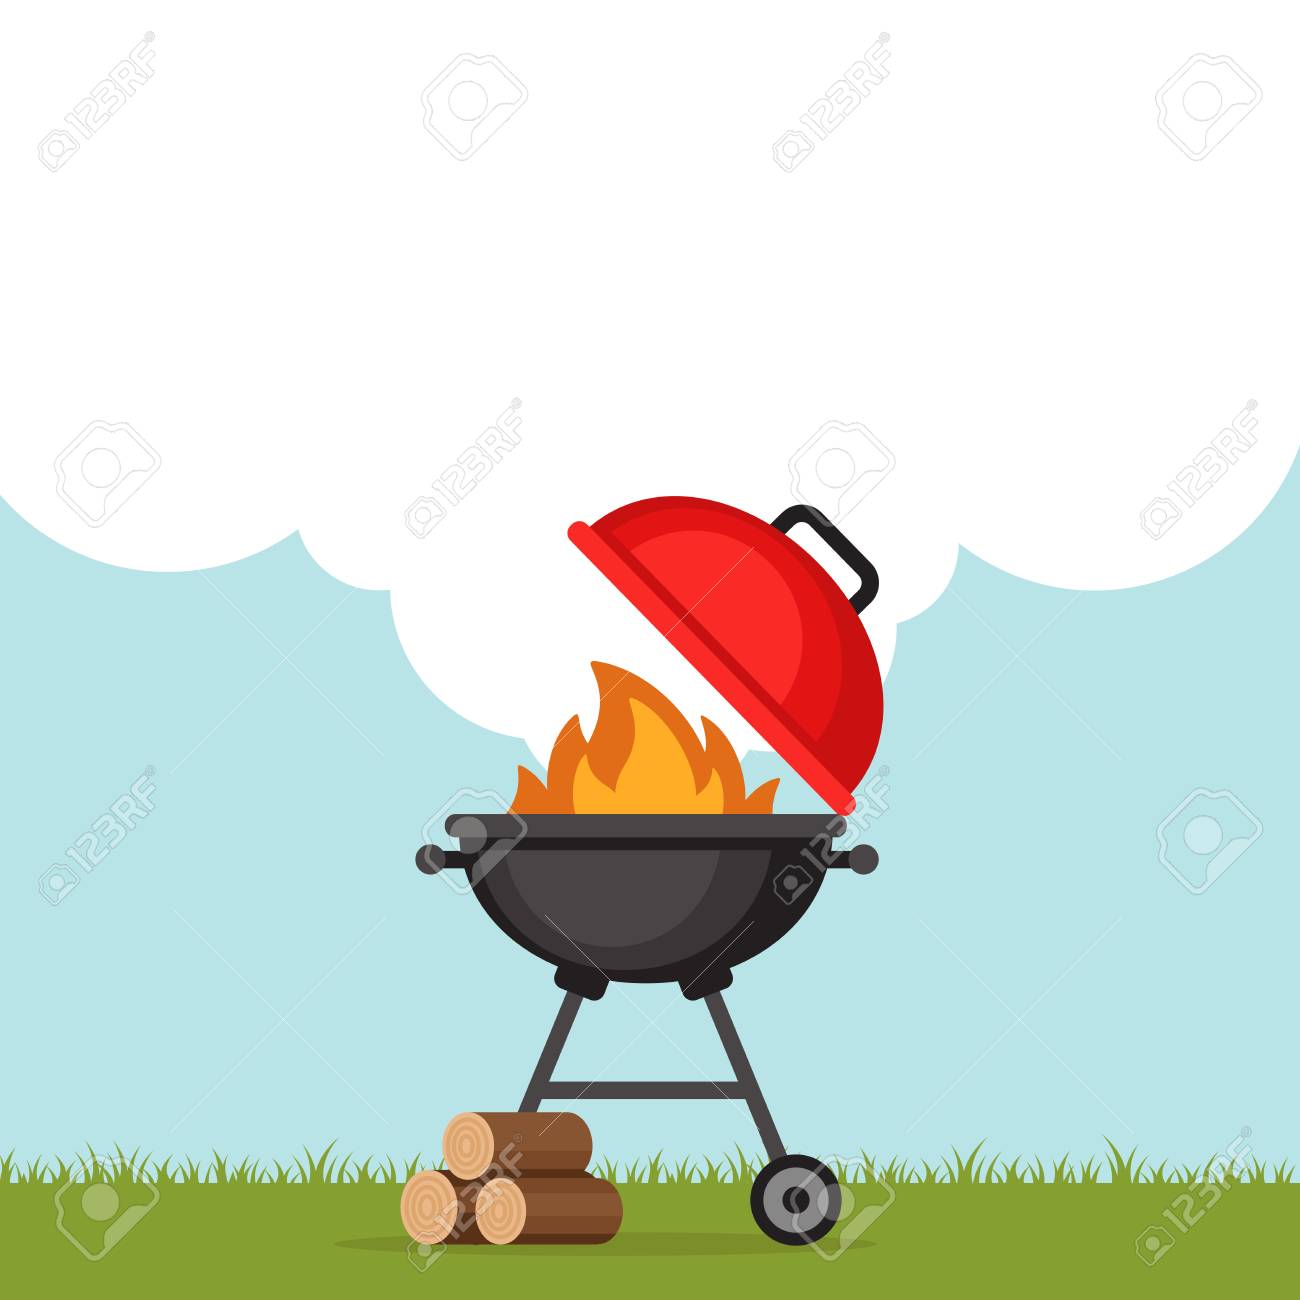 Bbq Party Background With Grill And Fire Barbecue Poster Flat